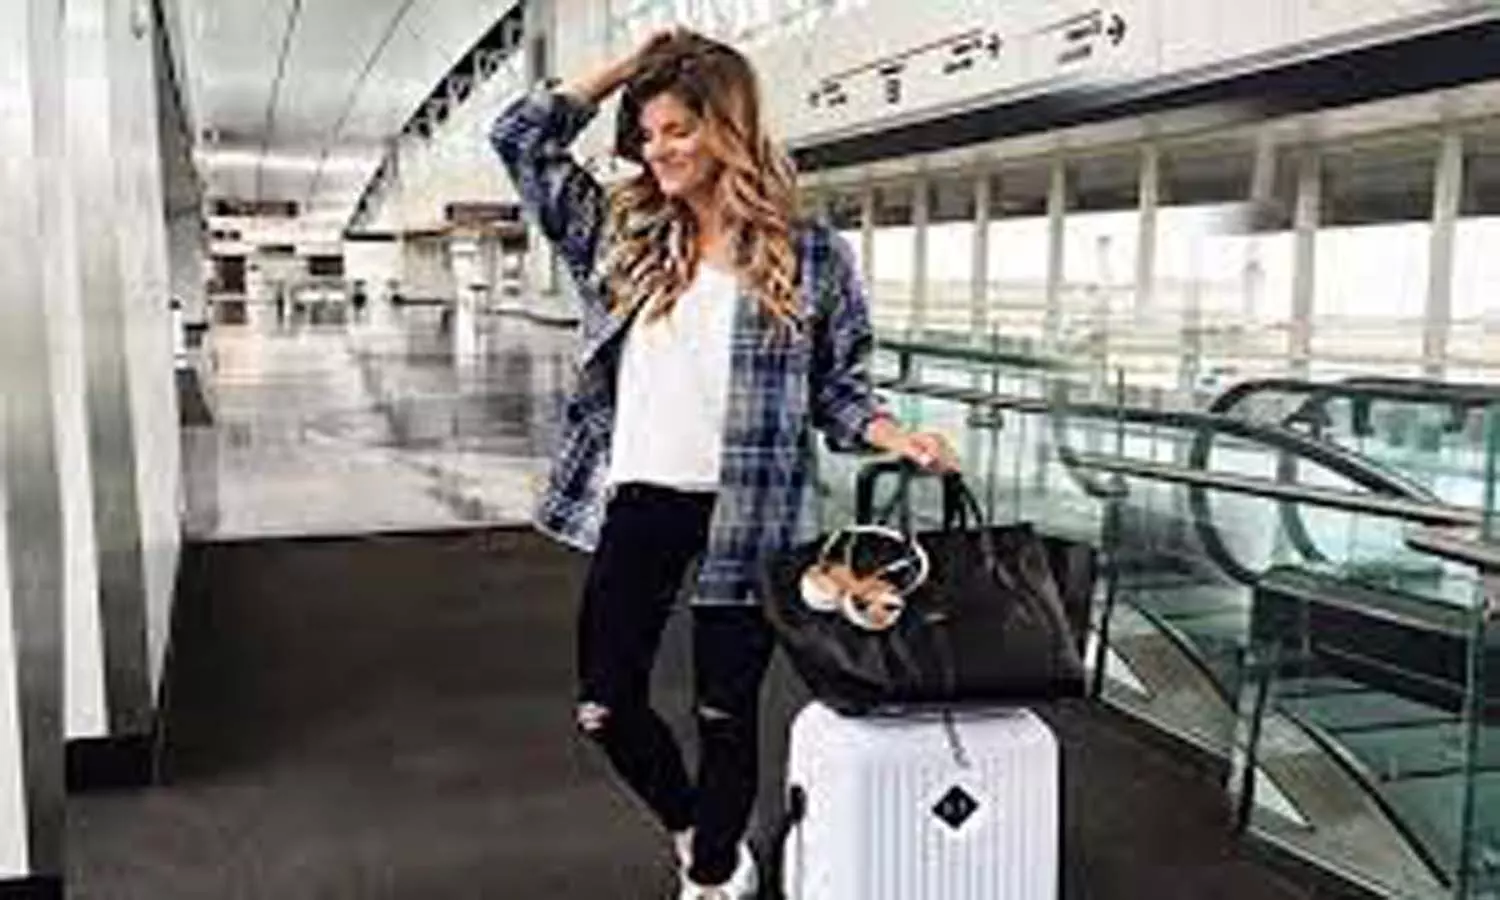 Travel Outfits: Traveling Outfit Ideas for Women, Comfy Travel Clothes